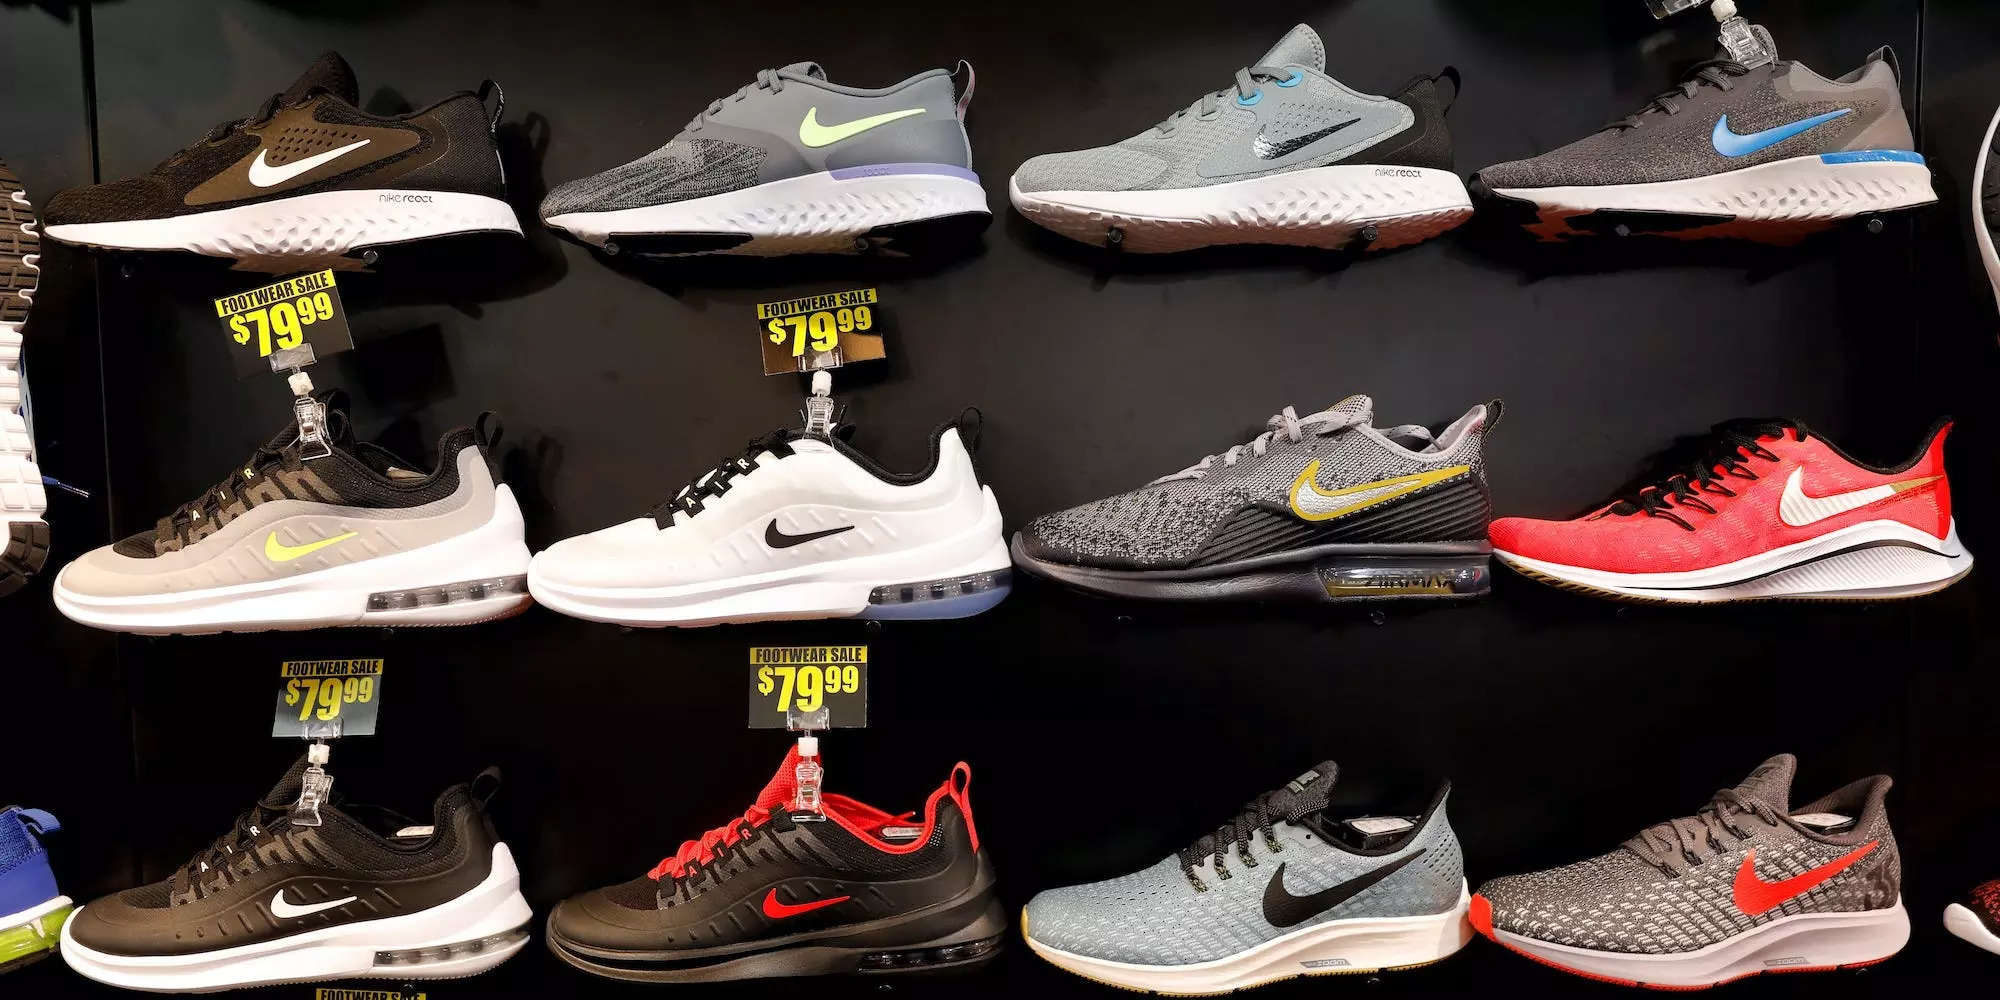 Nike fell 14% after the sportswear maker posted a 44% quarterly rise in inventory amid supply chain issues and warned of squeezed margins